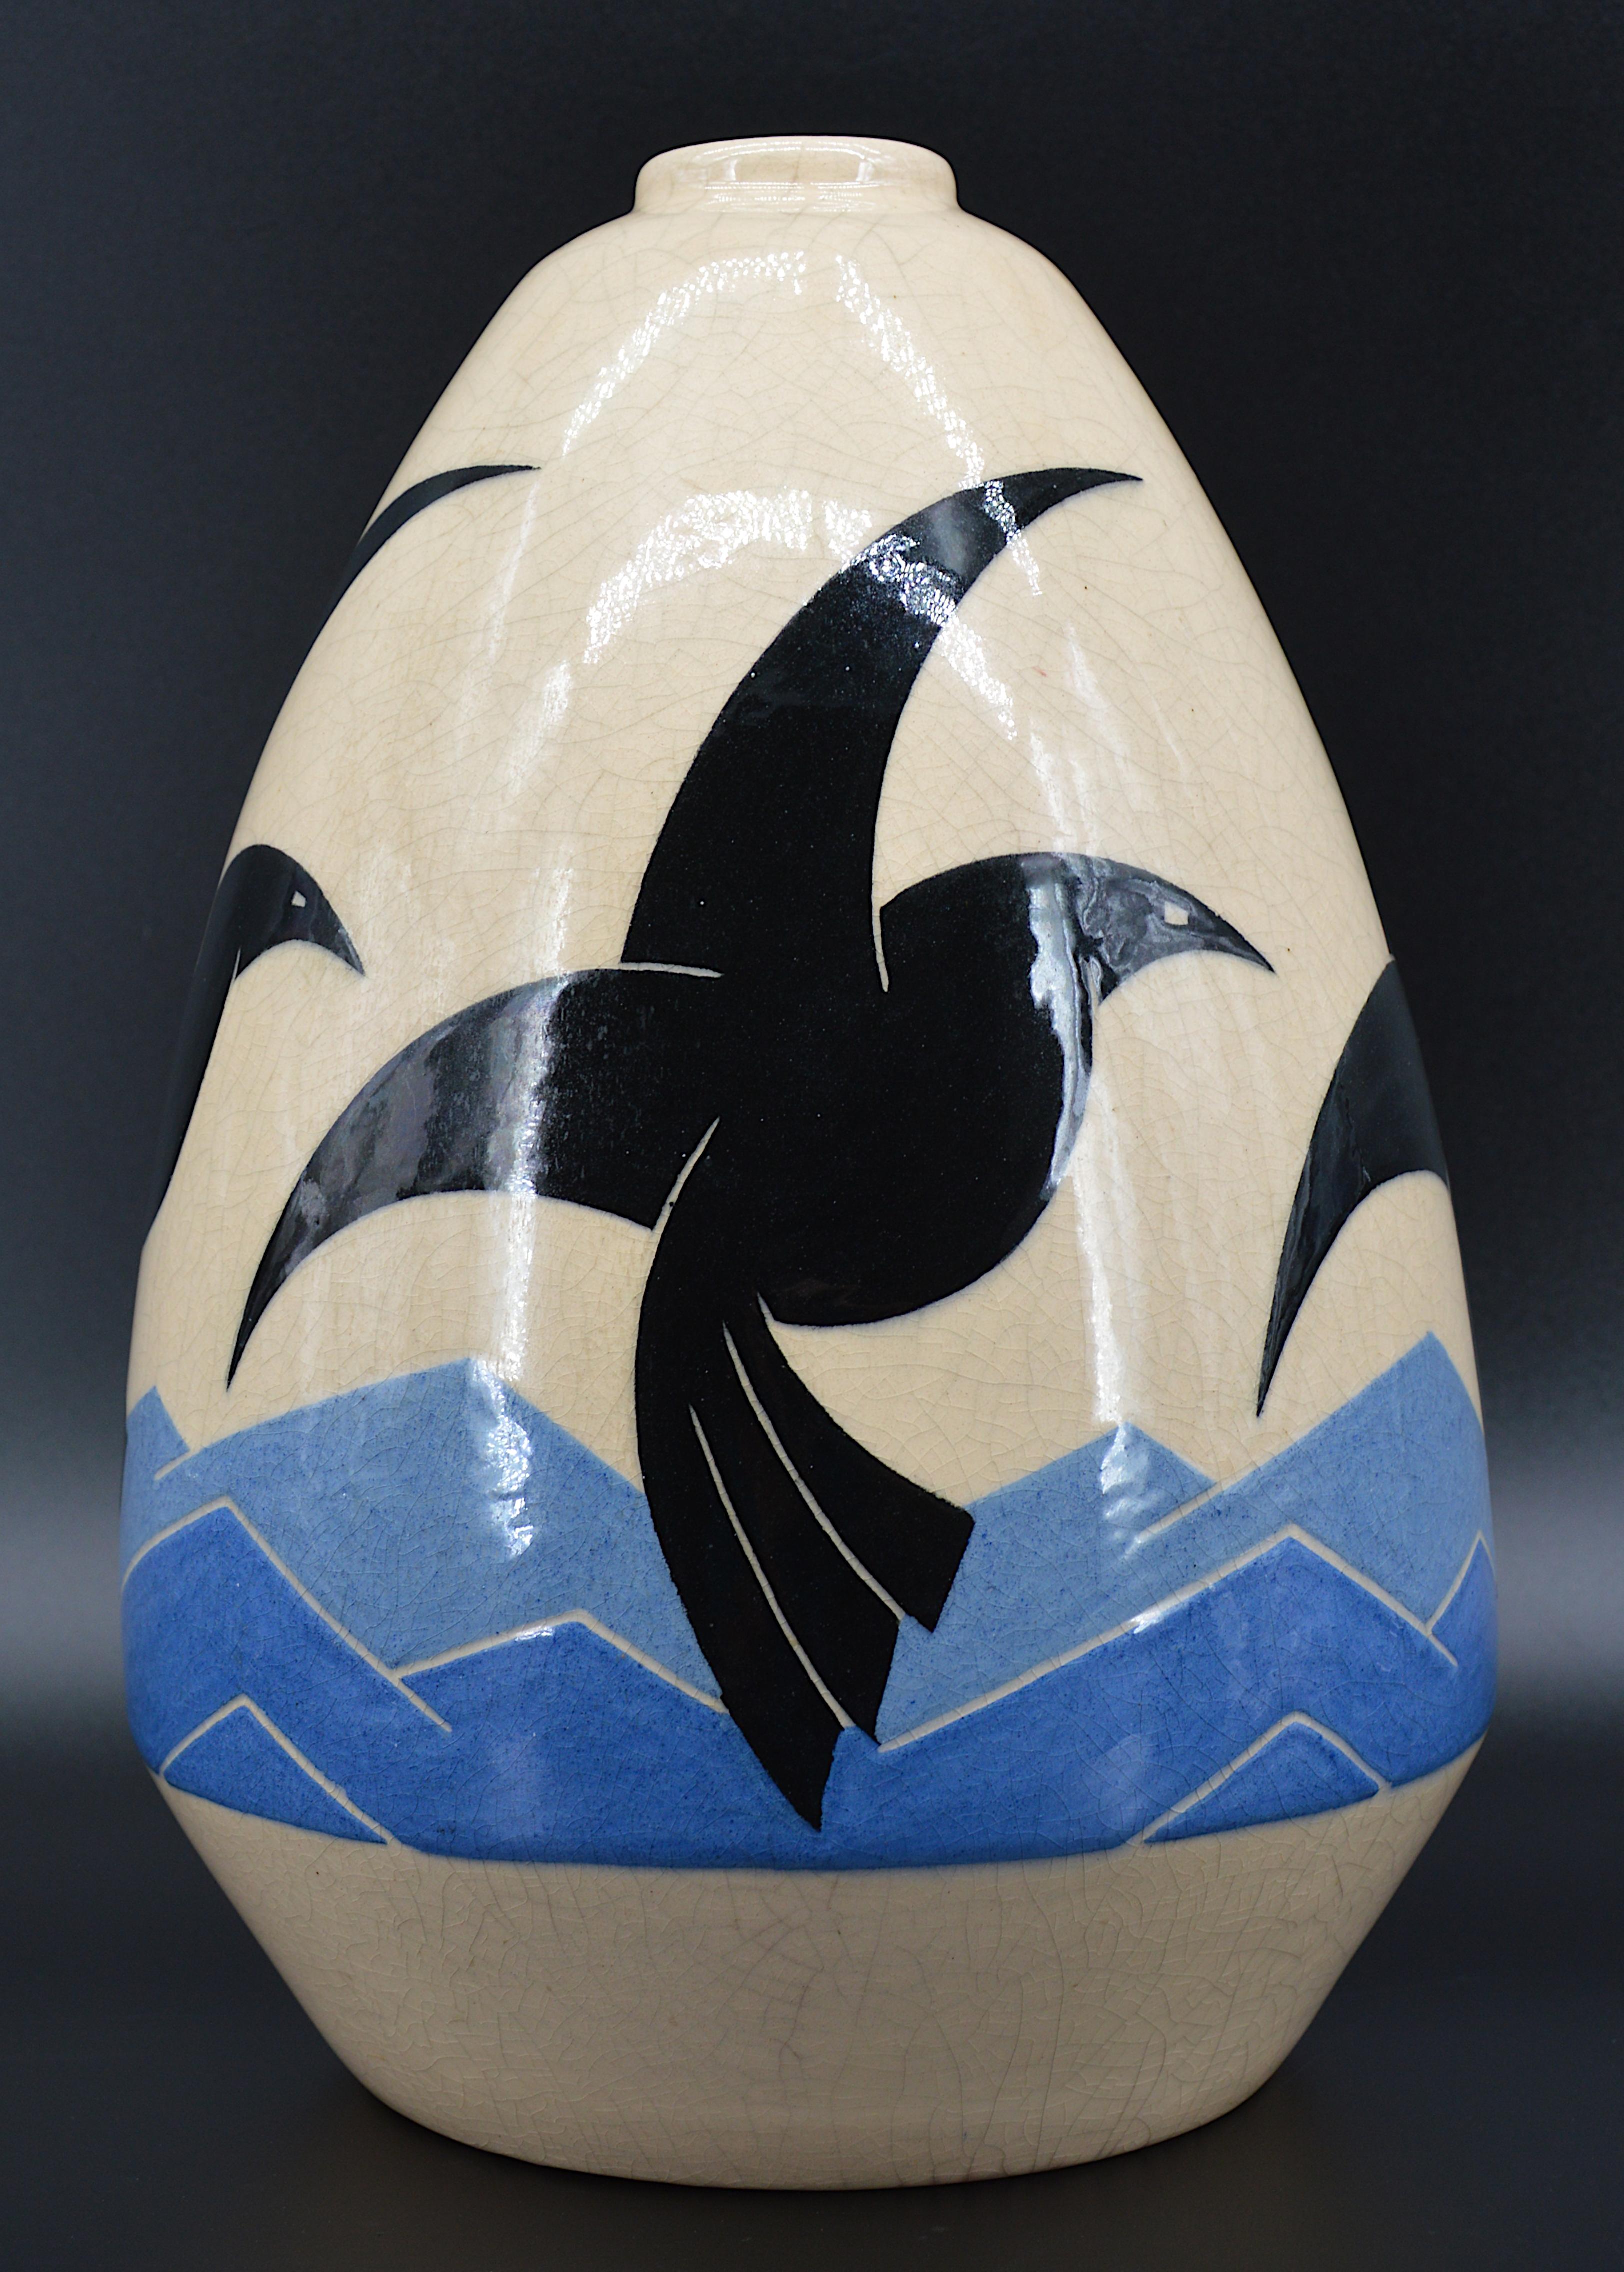 Museal large French Art Deco ceramic vase by Simone Larrieu, France, 1930s. Earthenware vase with ovoid body and ringed neck. Decorated with 4 stylized birds (seagulls) on a background of waves, black and blue enamel on a cracked beige background.